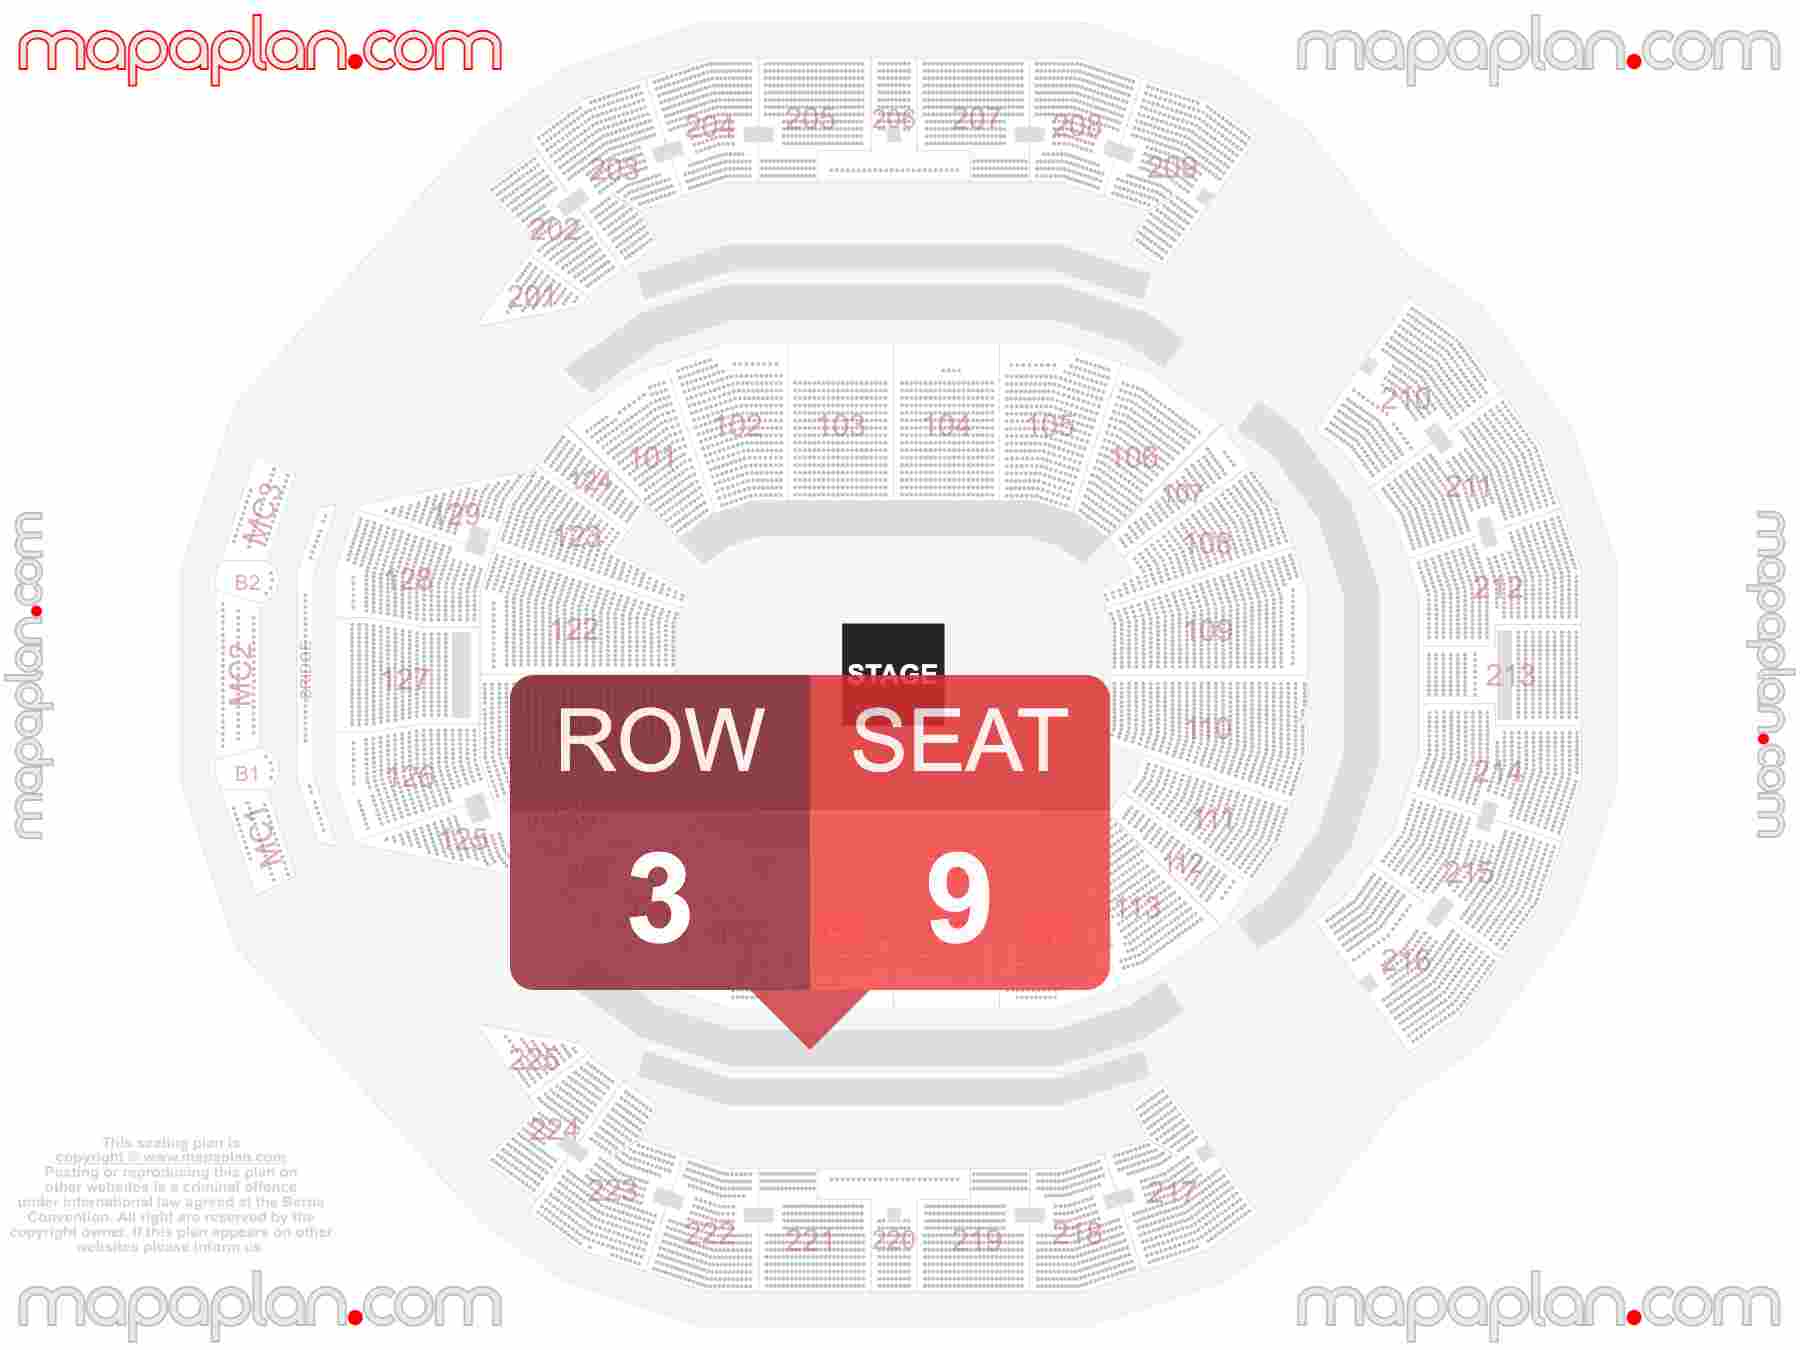 San Francisco Chase Center seating chart In the round concert stage interactive seating checker map plan showing seat numbers per row - Ticket prices sections review diagram